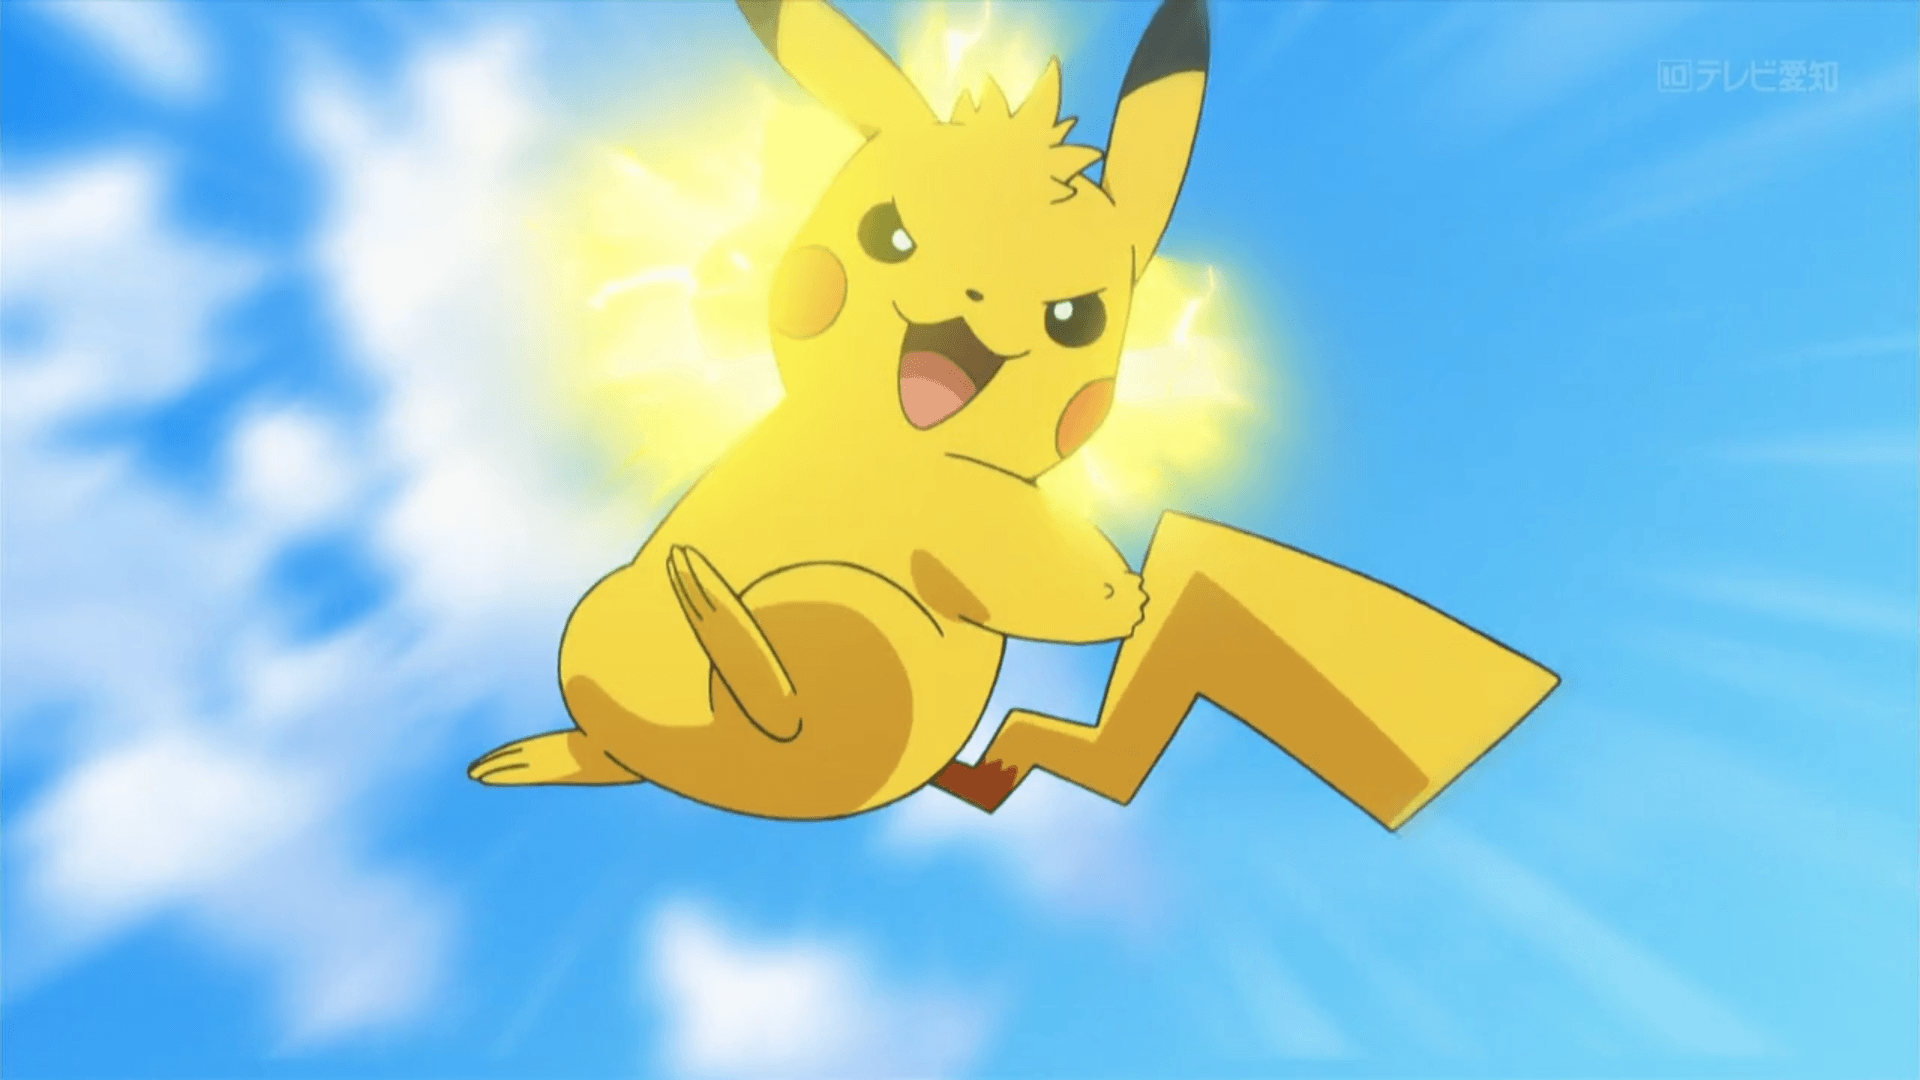 Pikachu HQ Backgrounds Wallpapers 37654.